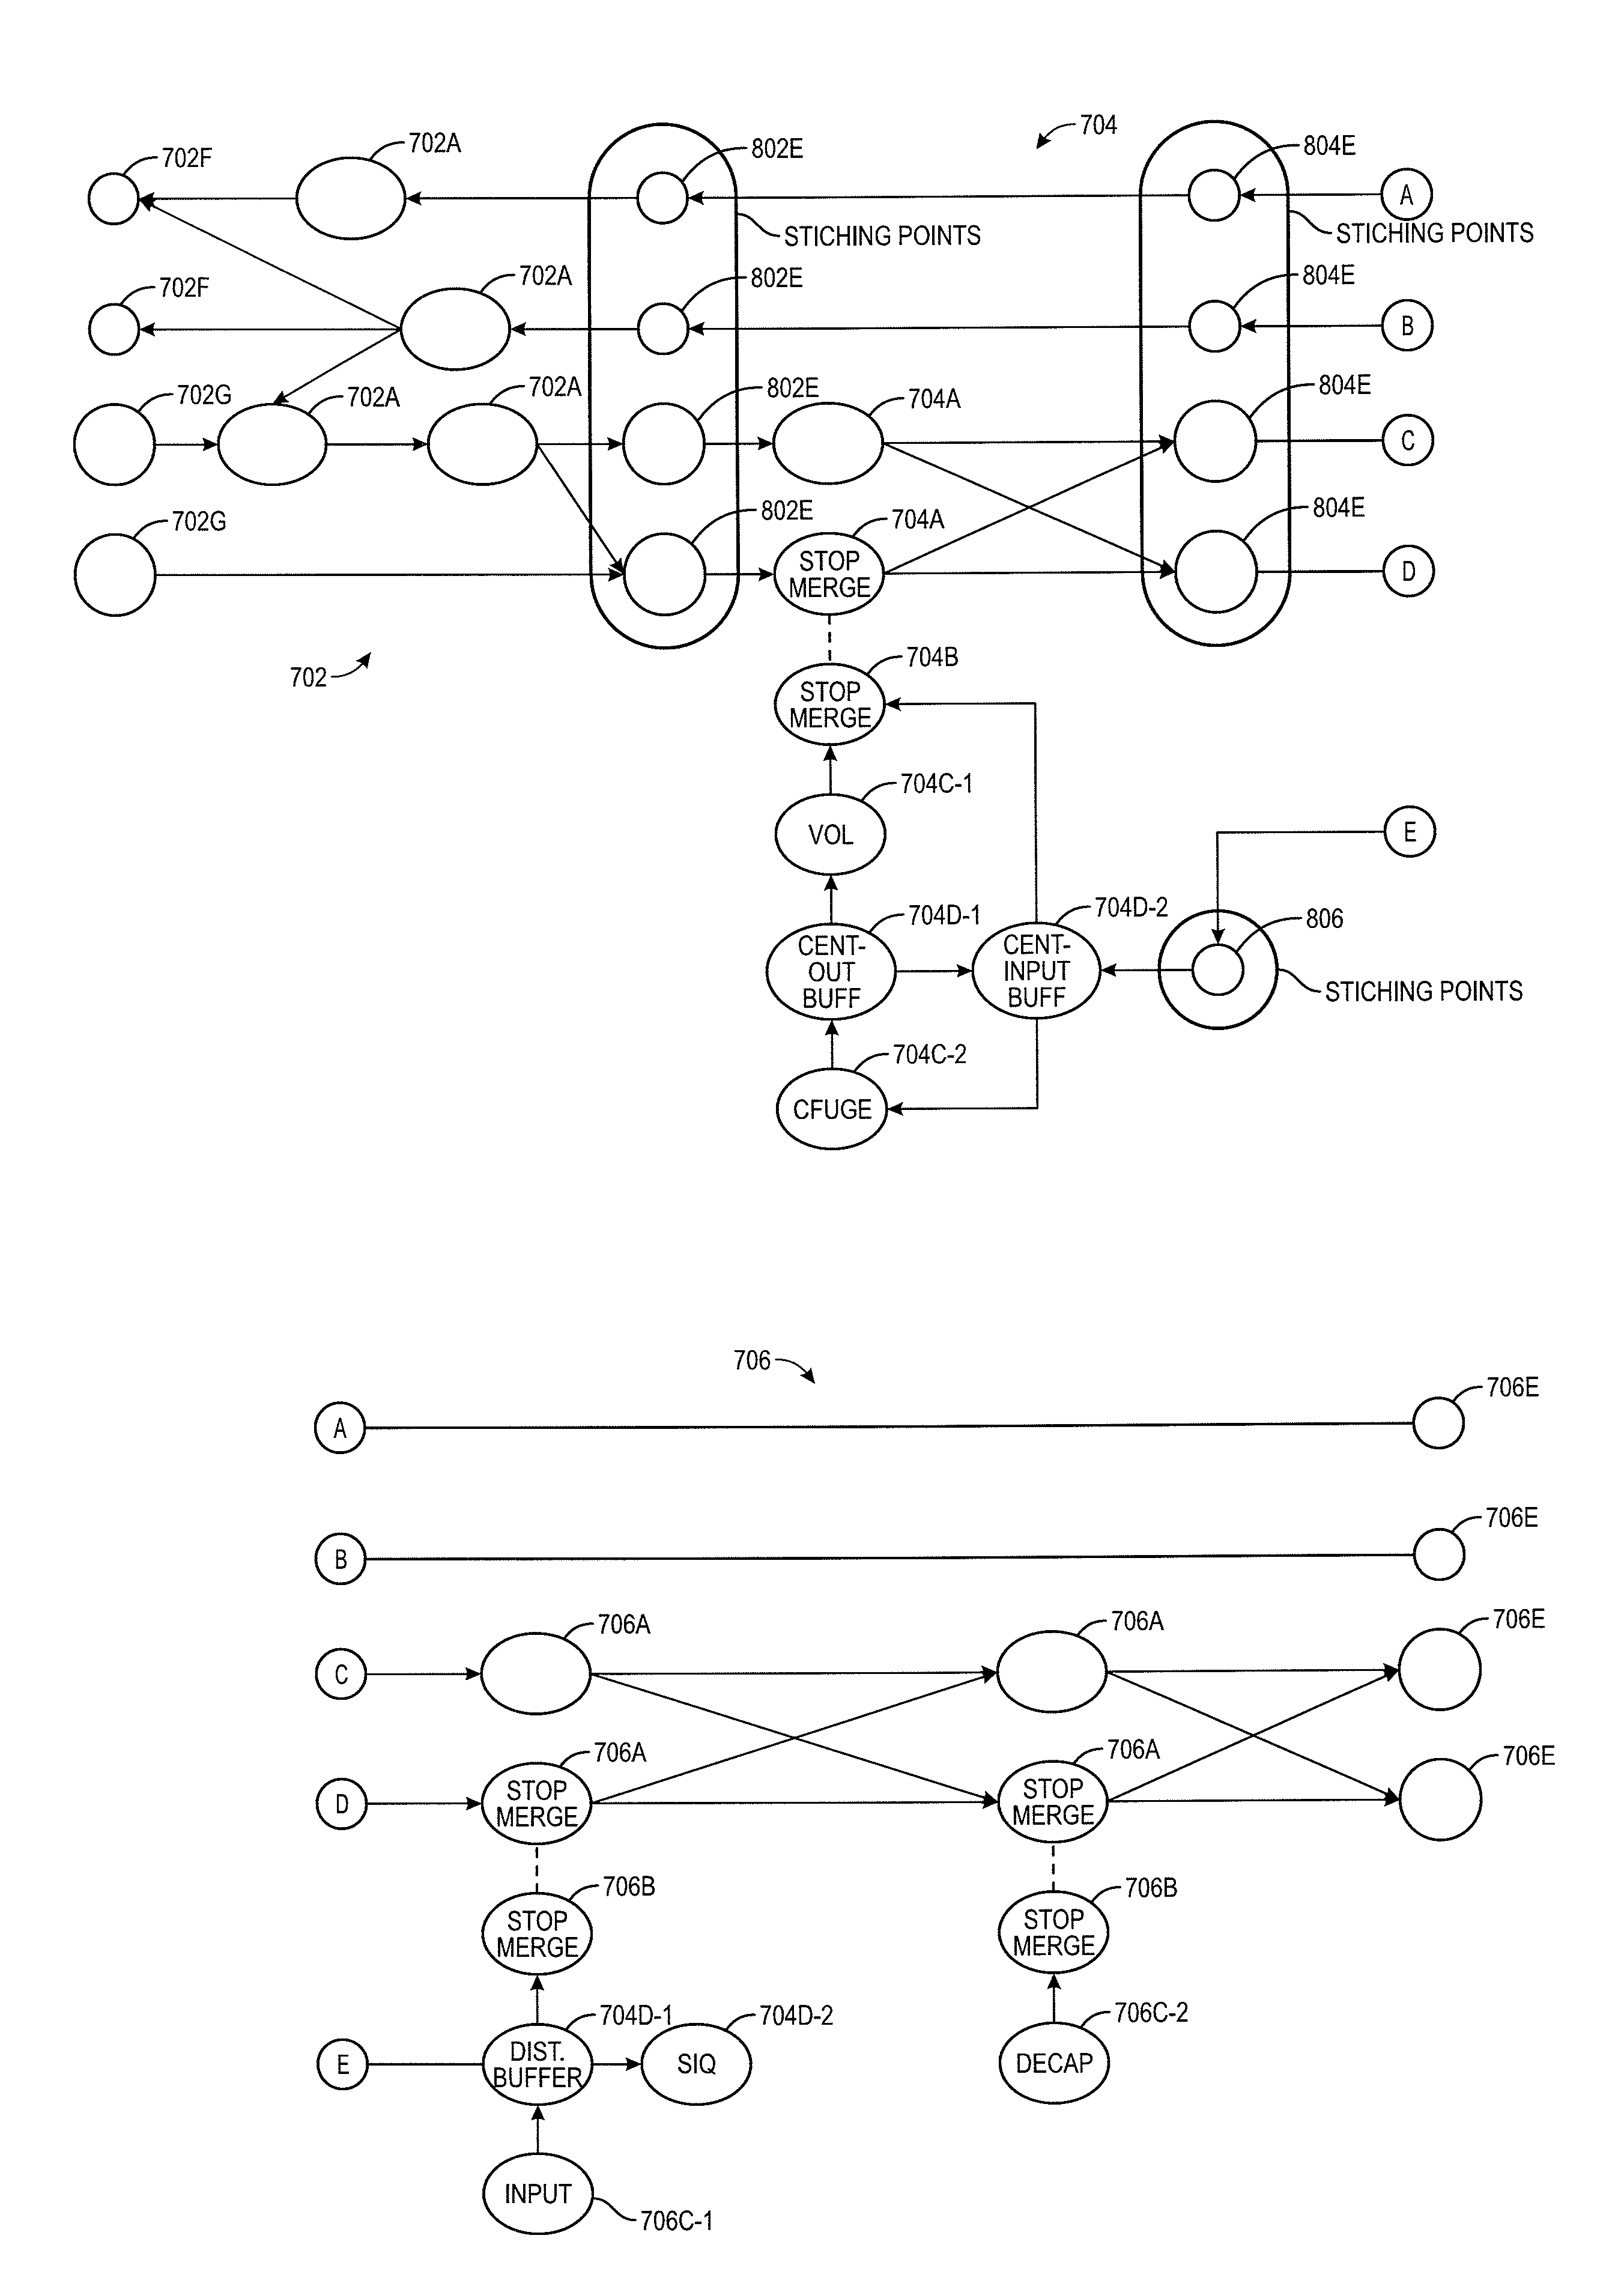 Method and system for forming site network